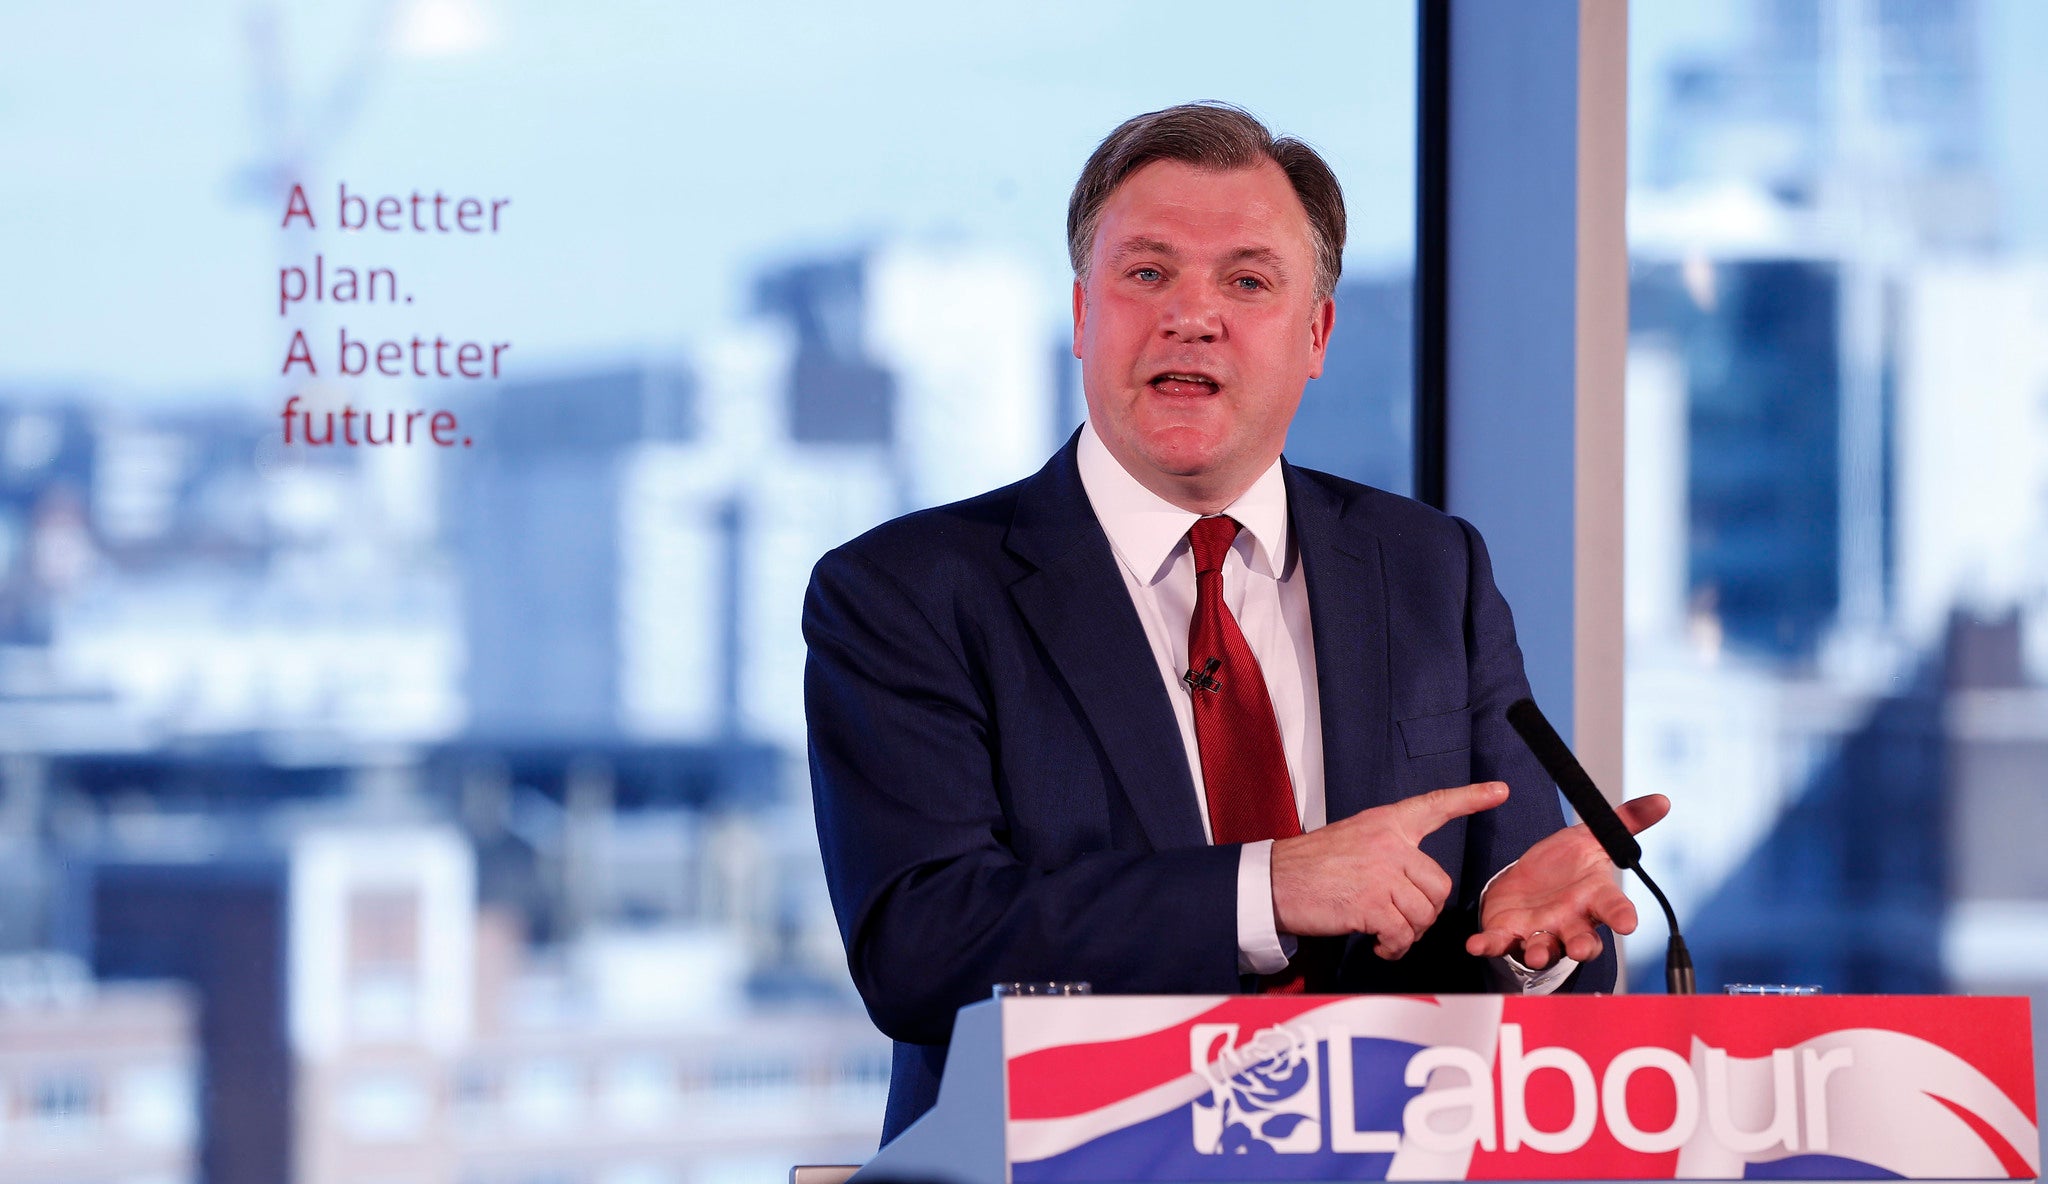 Ed Balls uses his fingers to work out the answer in Leeds this morning